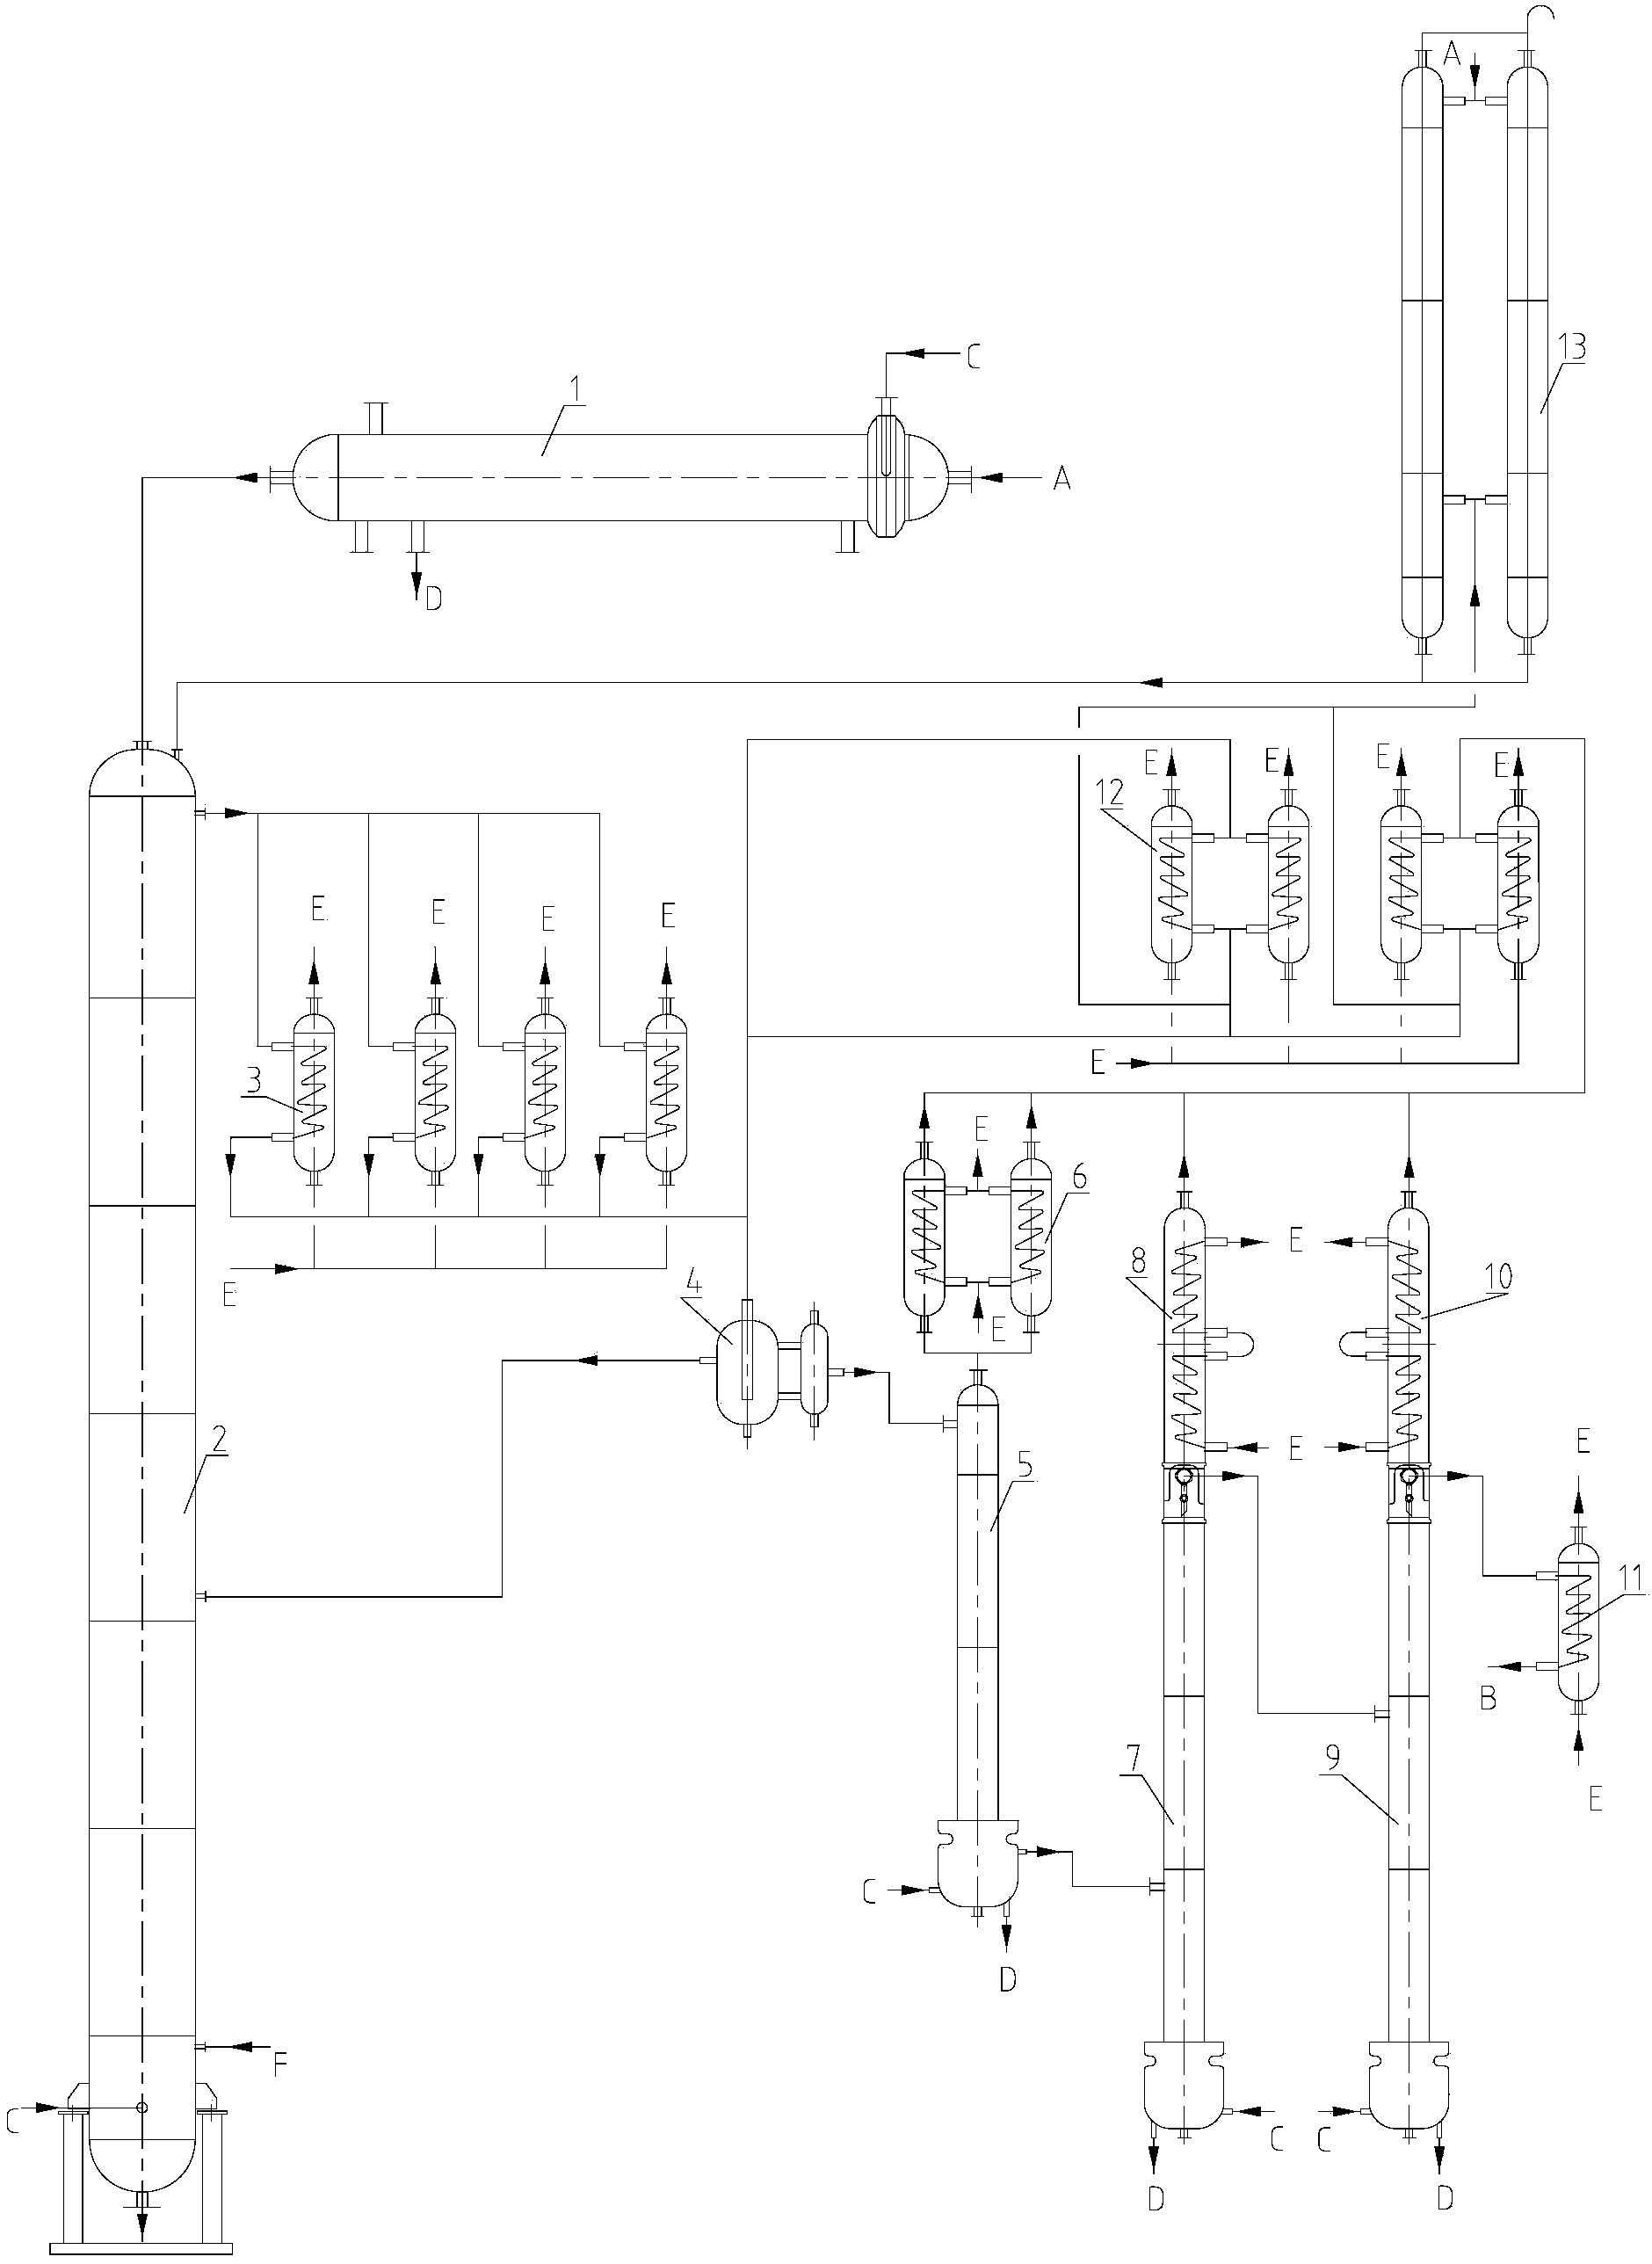 Method and device for producing bromine from brominated butyl rubber wastewater through steam distillation